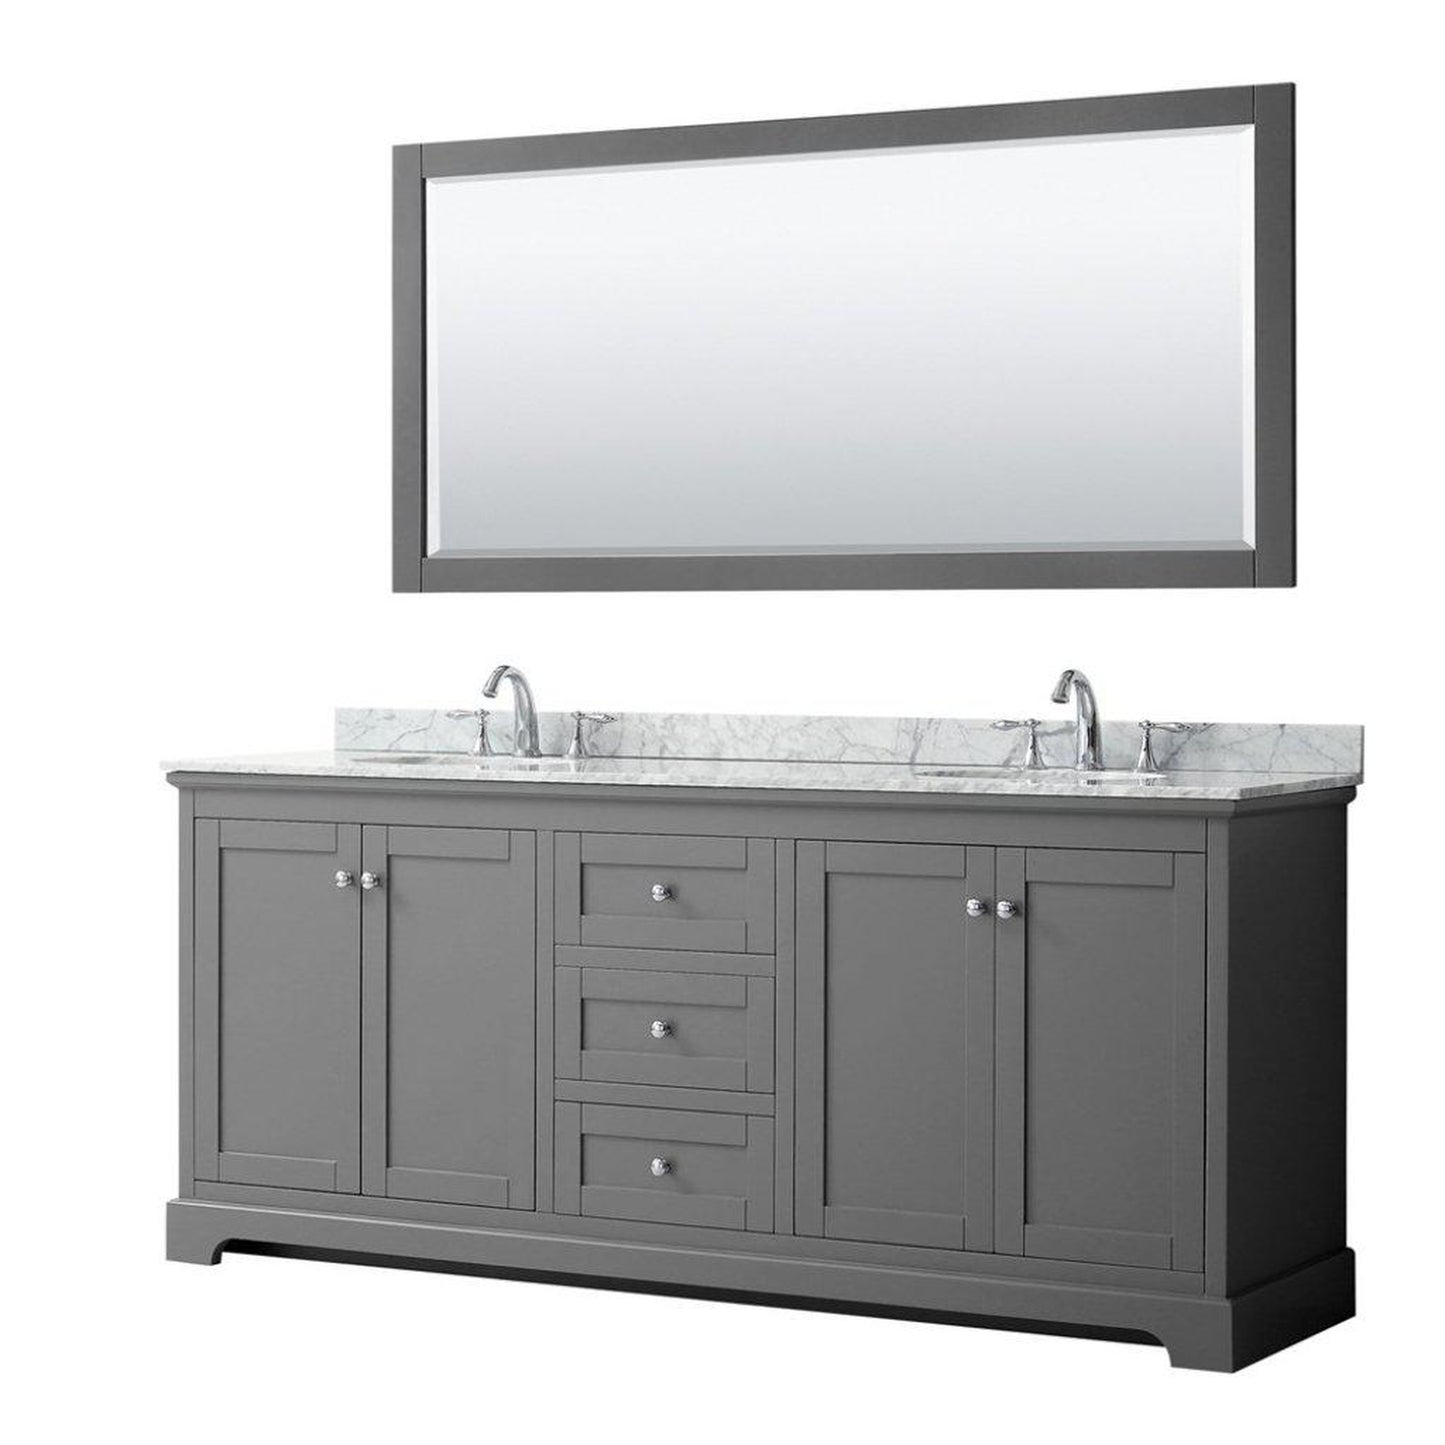 Wyndham Collection Avery 80" Dark Gray Double Bathroom Vanity Set With White Carrara Marble Countertop With 3-Hole Faucet And 8" Oval Sink And 70" Mirror